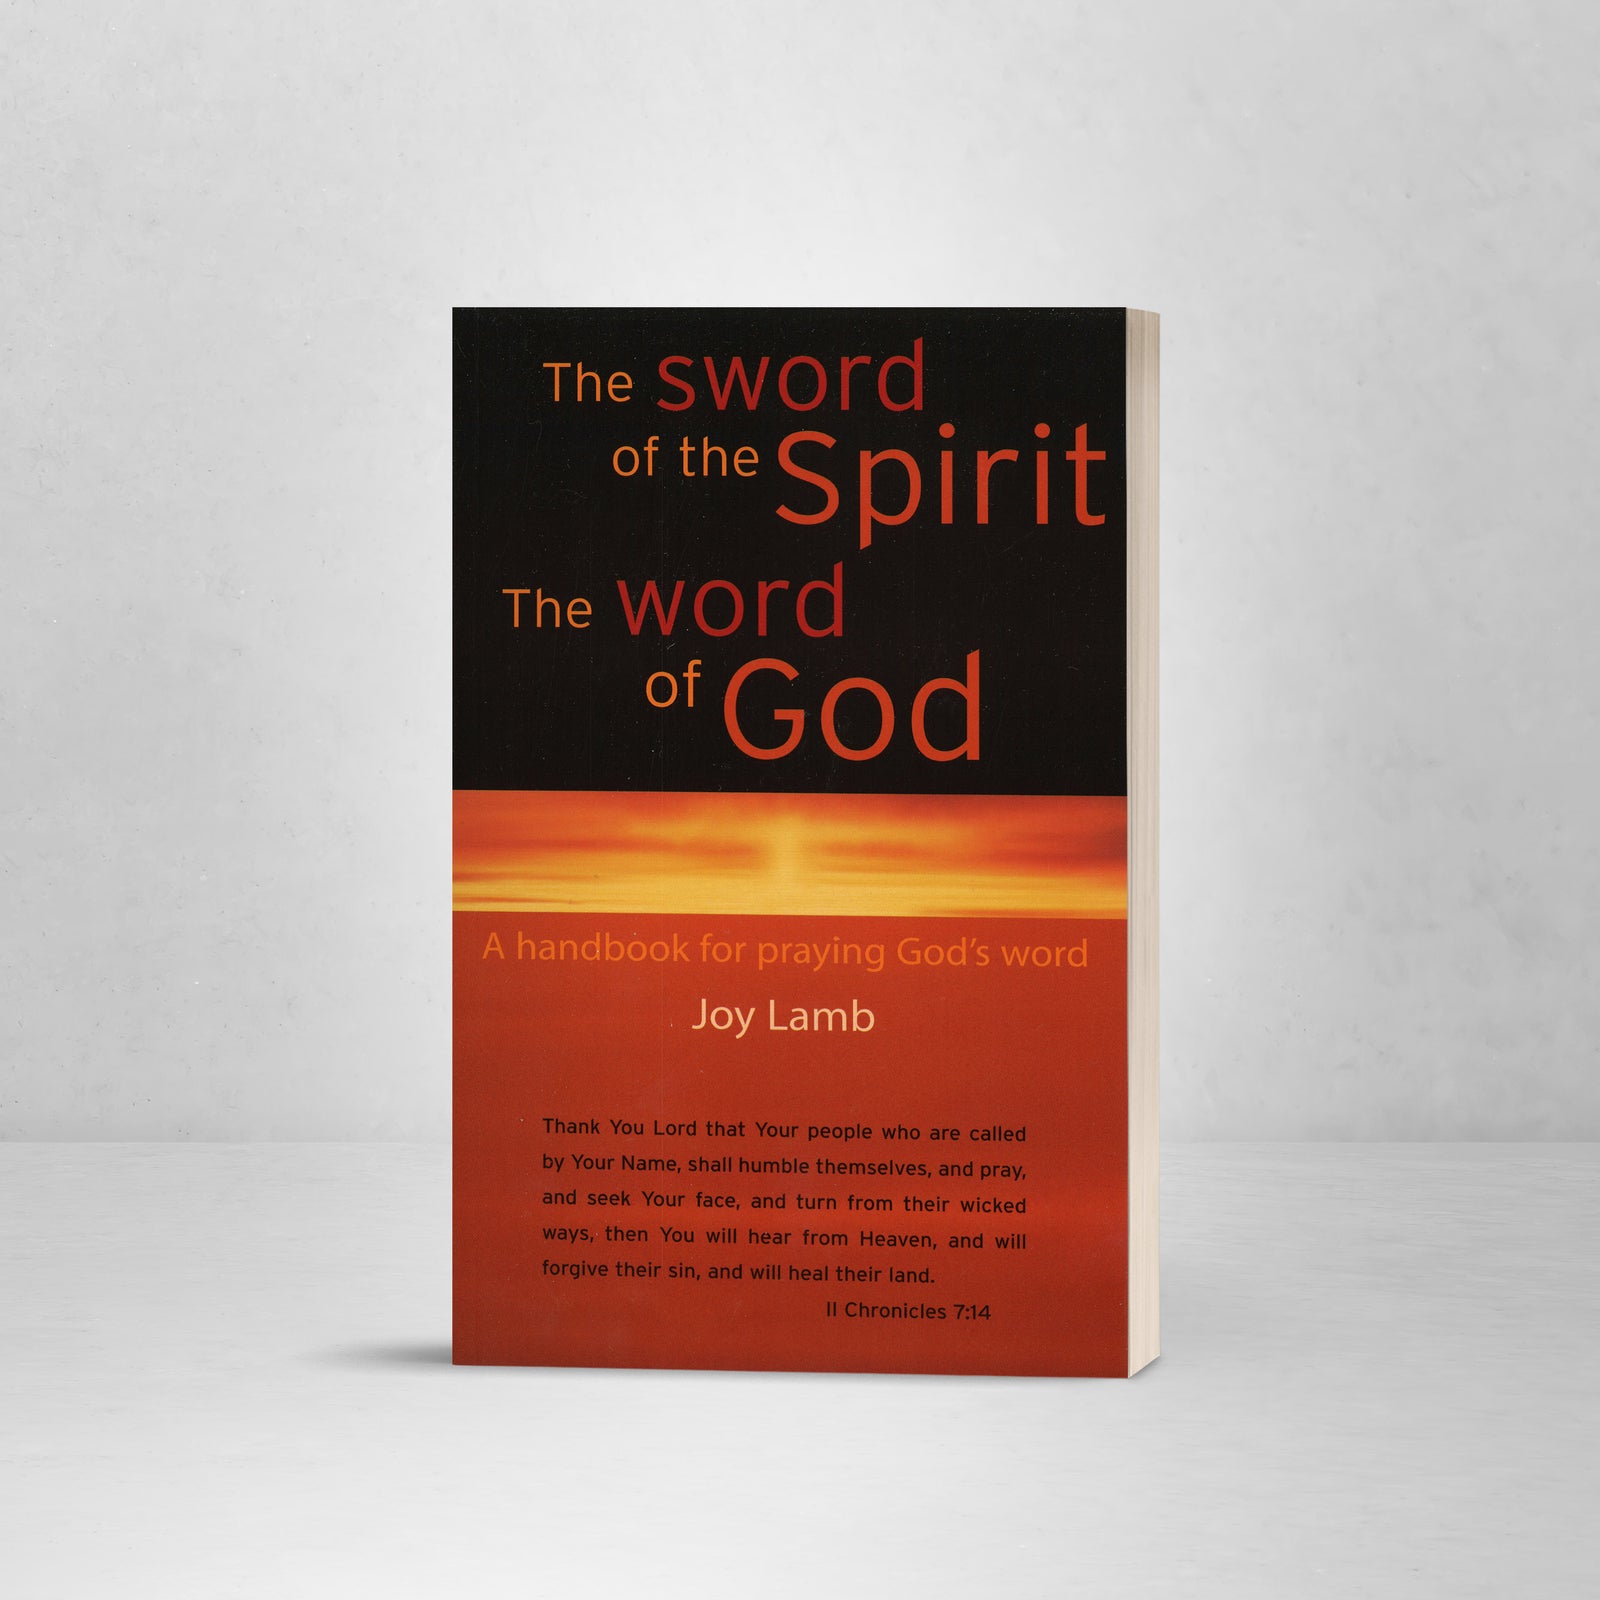 The Sword of the Spirit: The Word of God